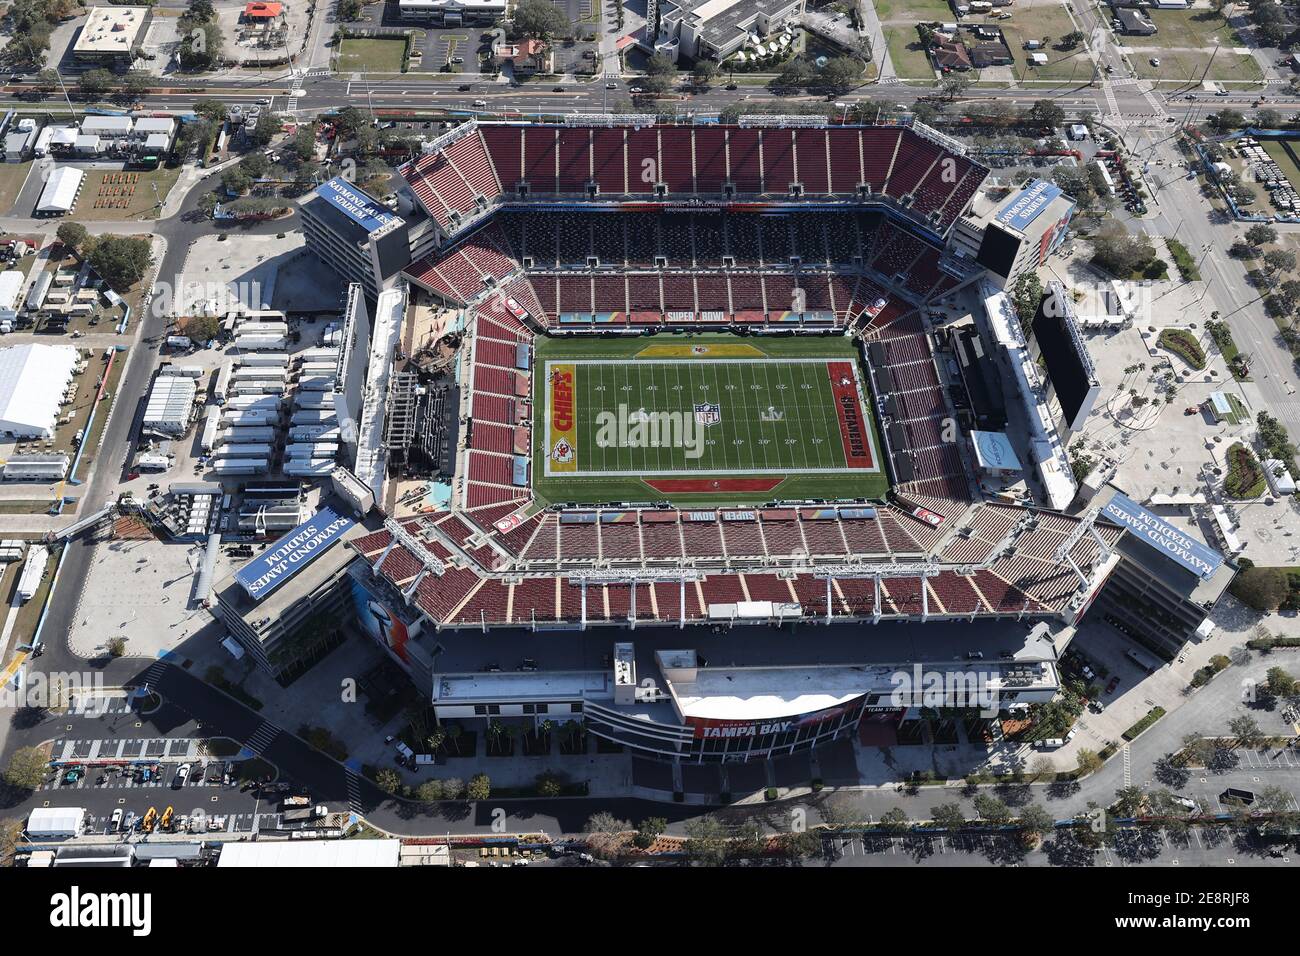 Tampa, FL, USA. 31st Jan, 2021. Aerial view vf Raymond James Stadium, site of Super Bowl LV between The Tampa Bay Buccaneers and the Kansas City Chiefs on January 31, 2021. Credit: Mpi34/Media Punch/Alamy Live News Stock Photo